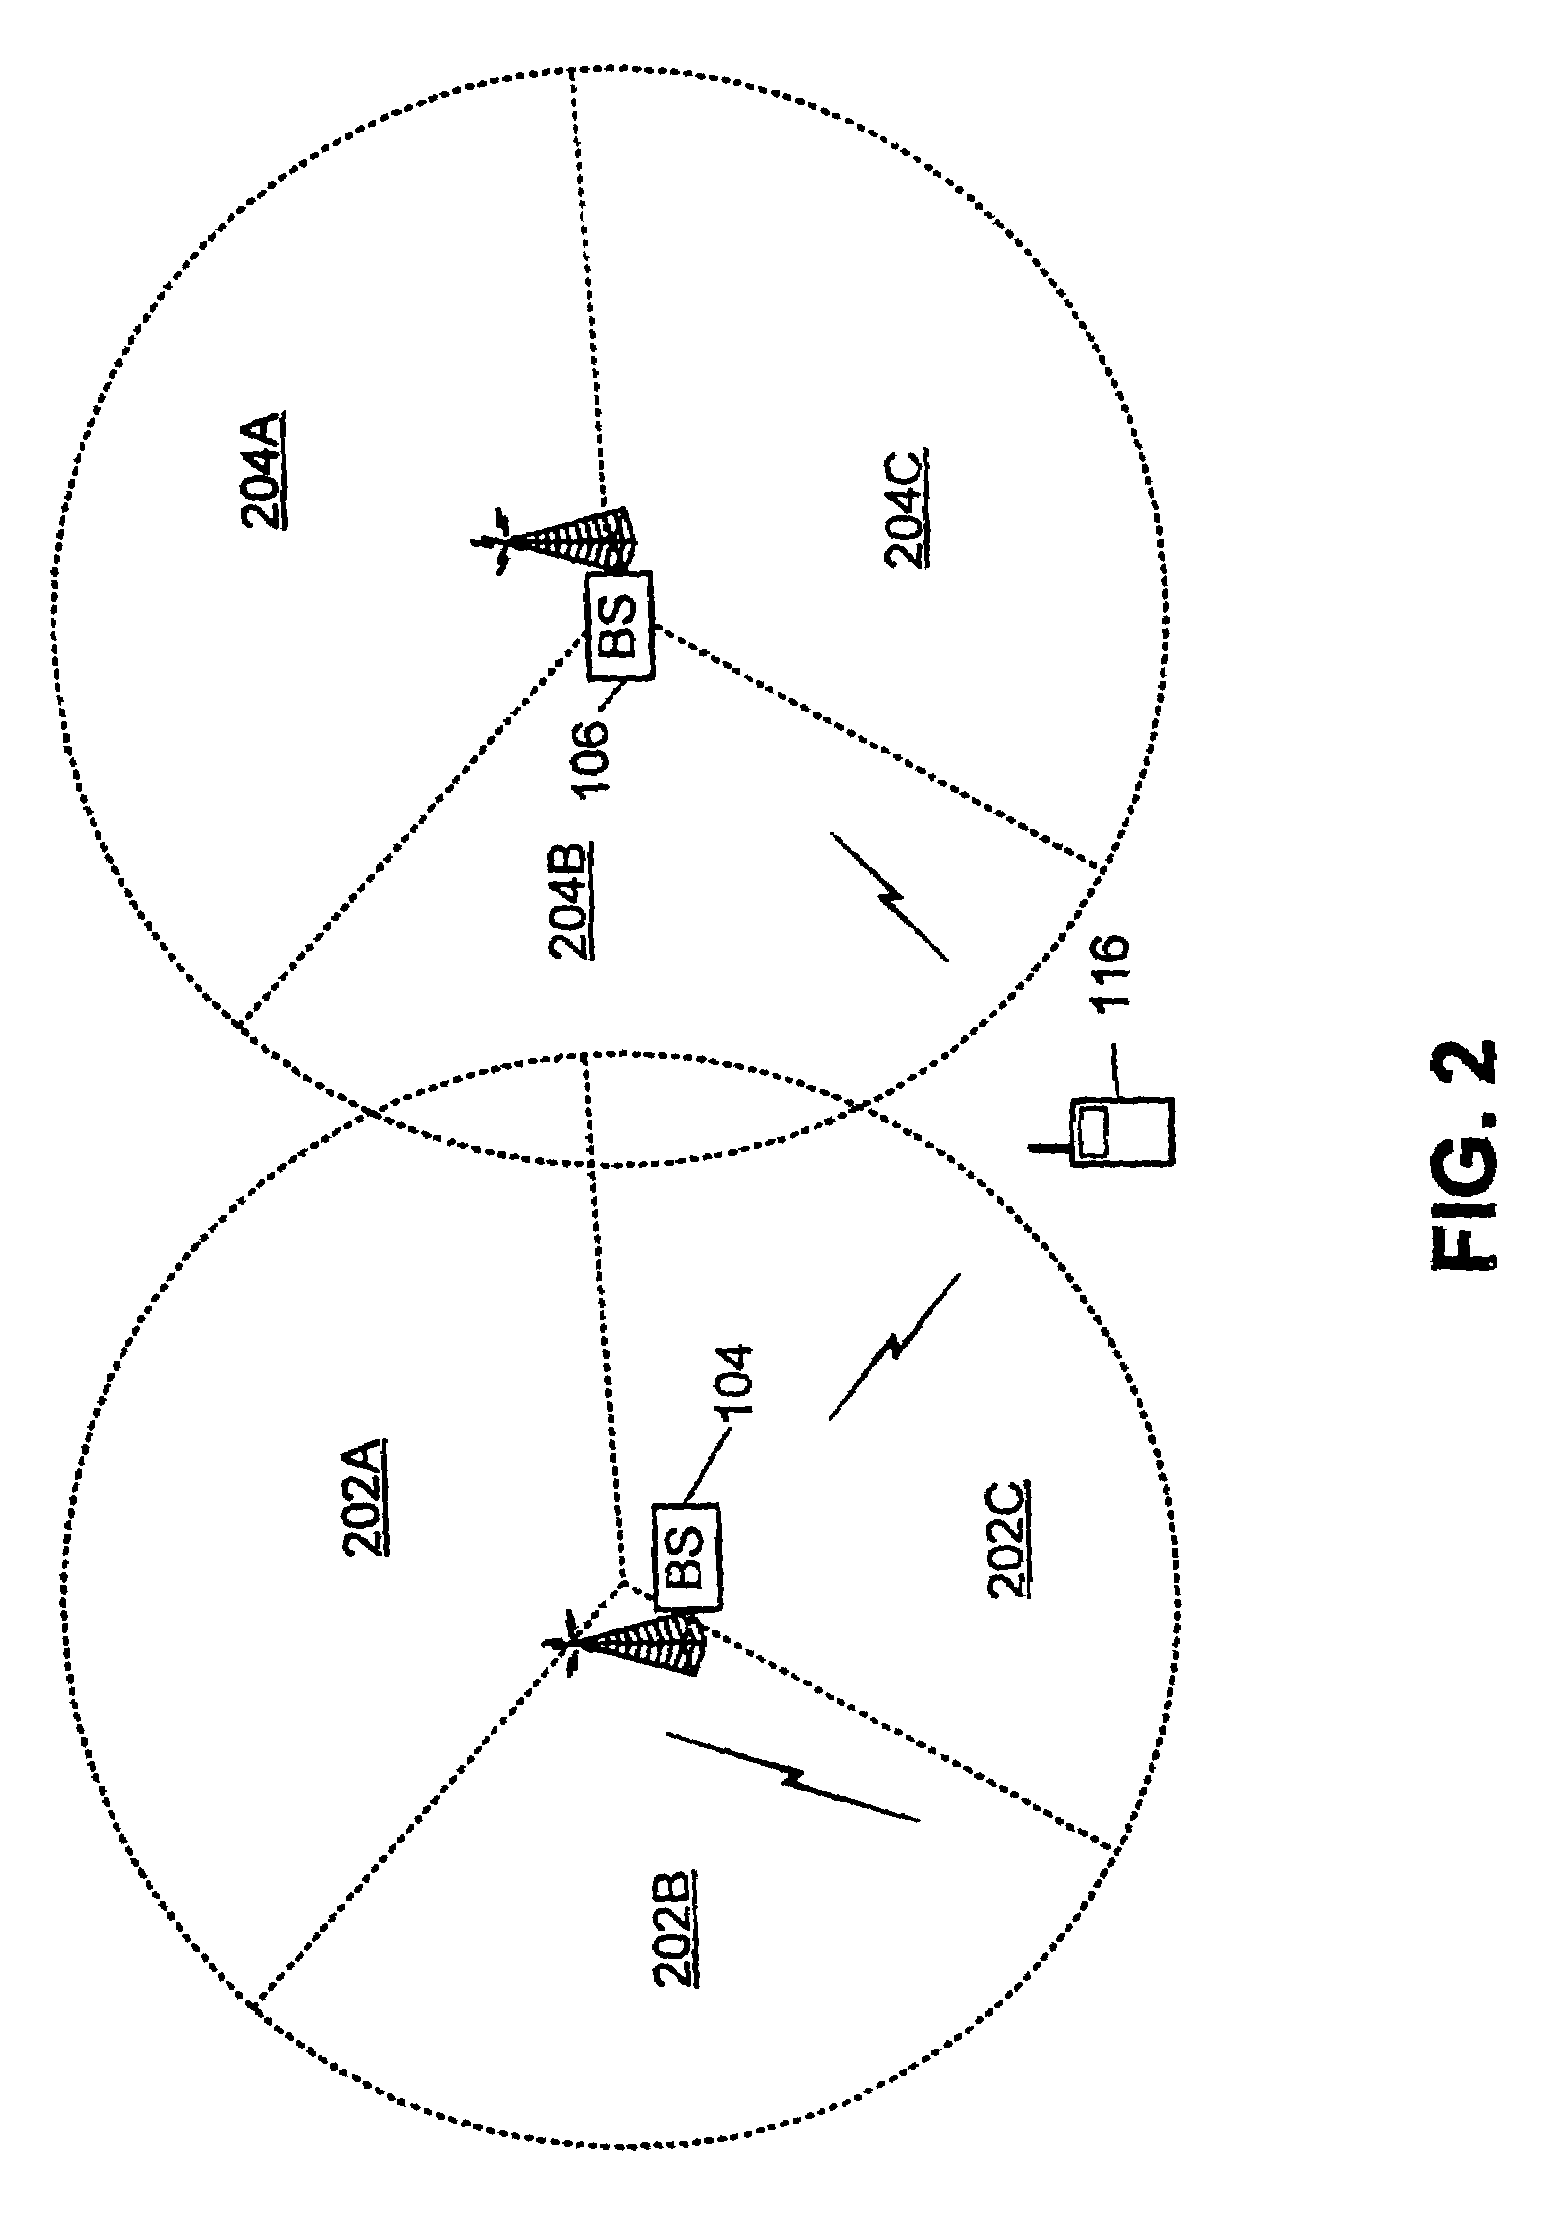 Method and apparatus of forward link and reverse link power control in a cellular wireless communication system